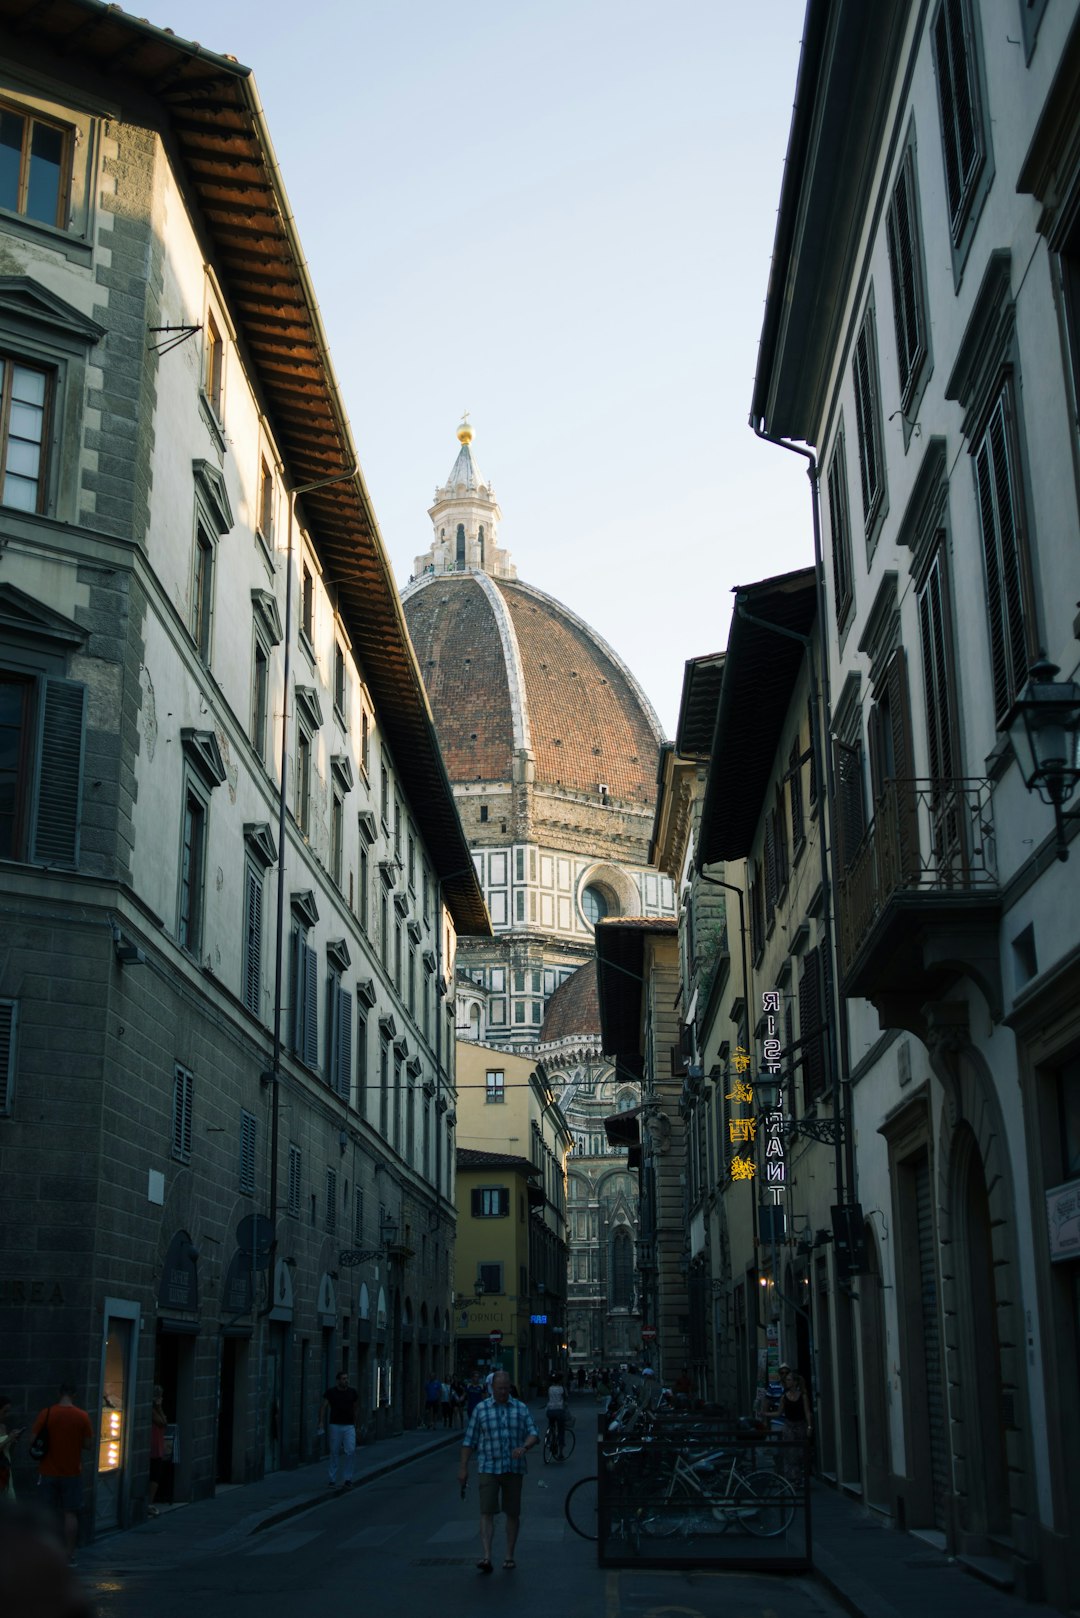 Travel Tips and Stories of Cathedral of Santa Maria del Fiore in Italy